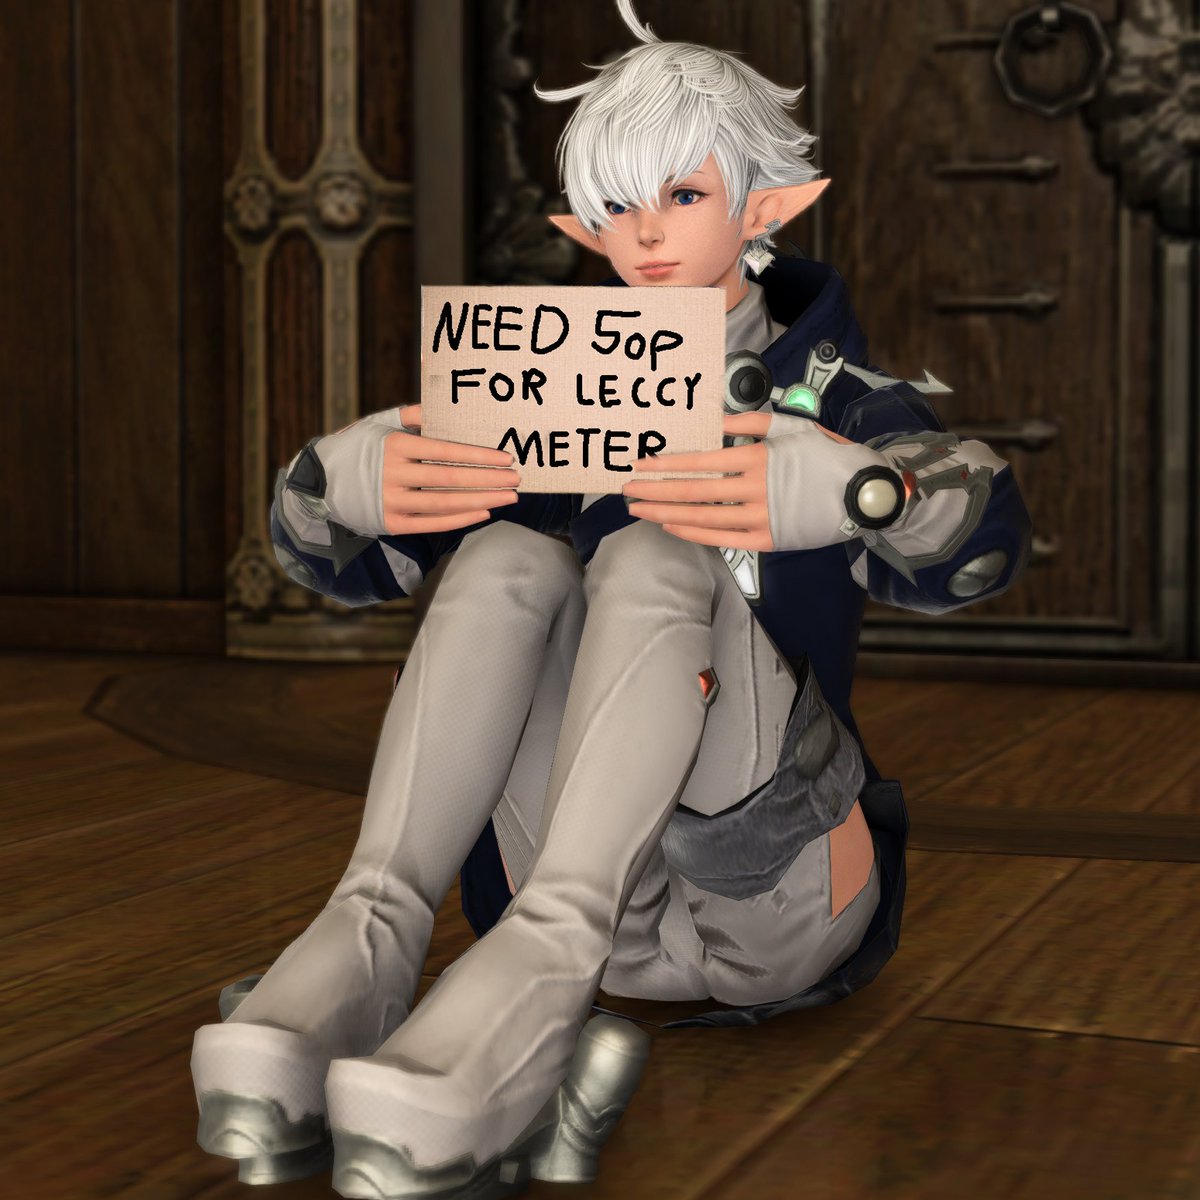 Can you spare Alphinaud some change?